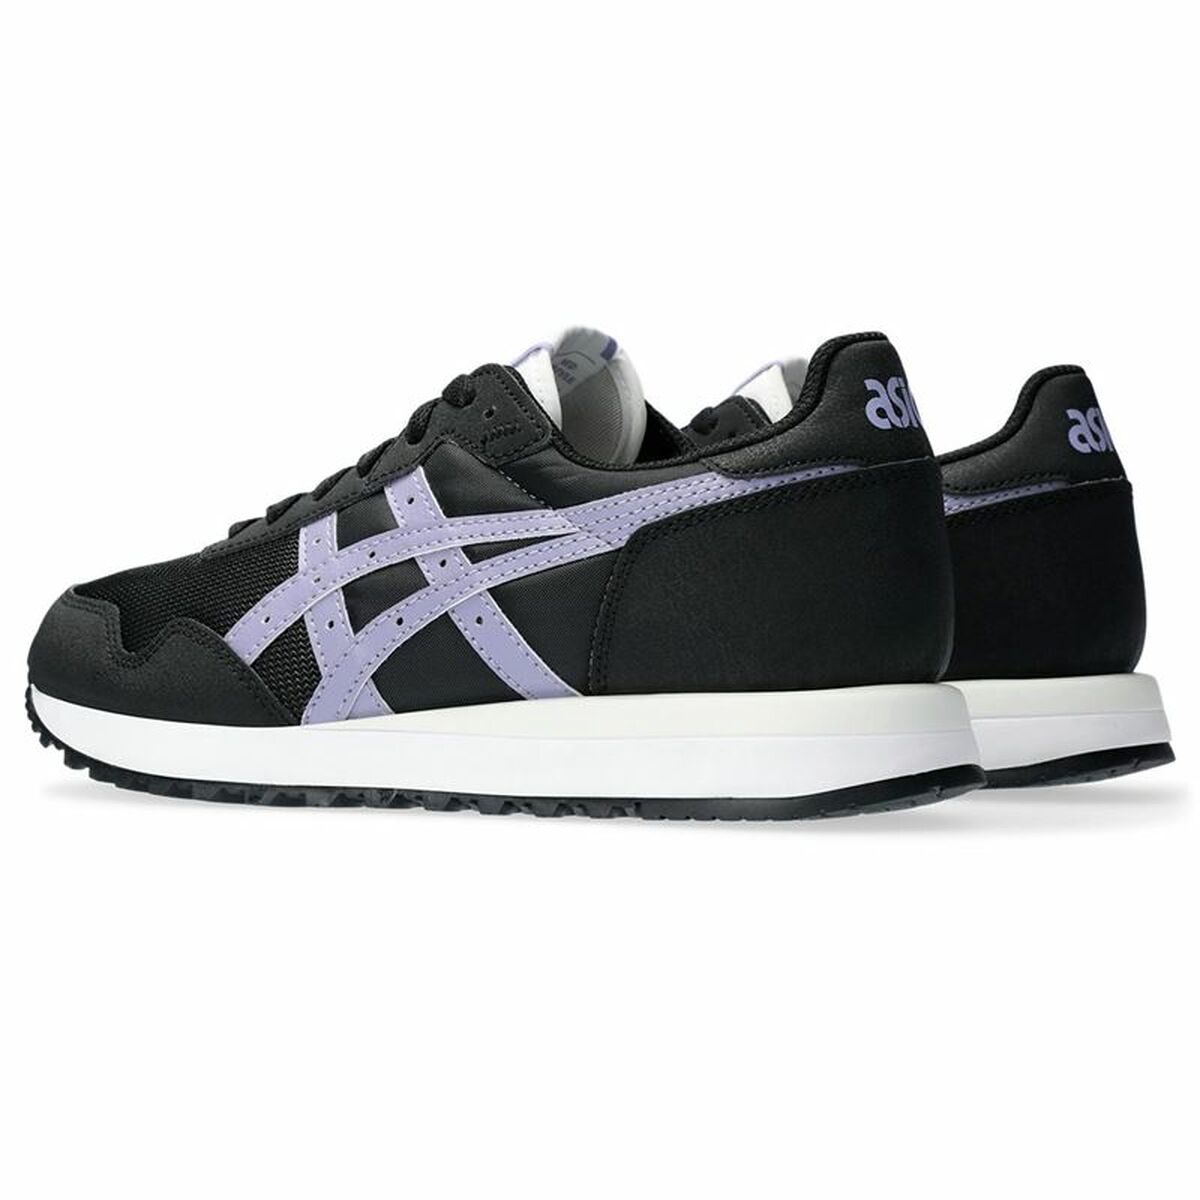 Women's casual trainers Asics Tiger Runner II Black